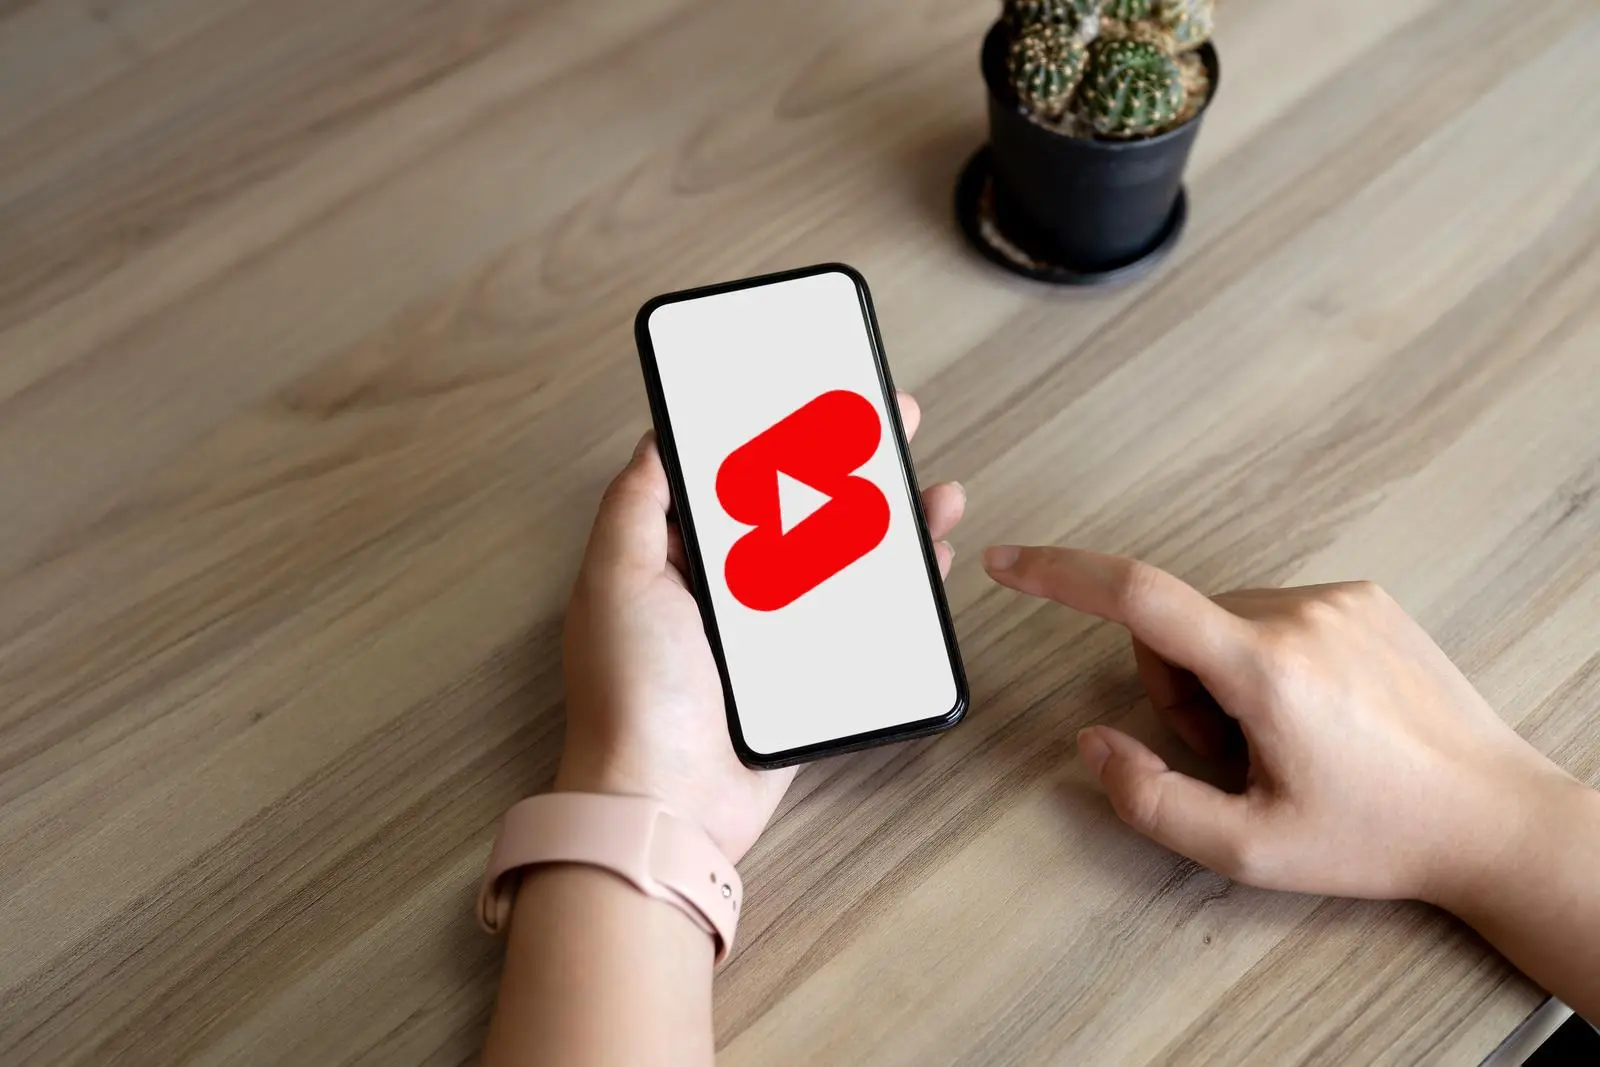 YouTube shorts on a phone